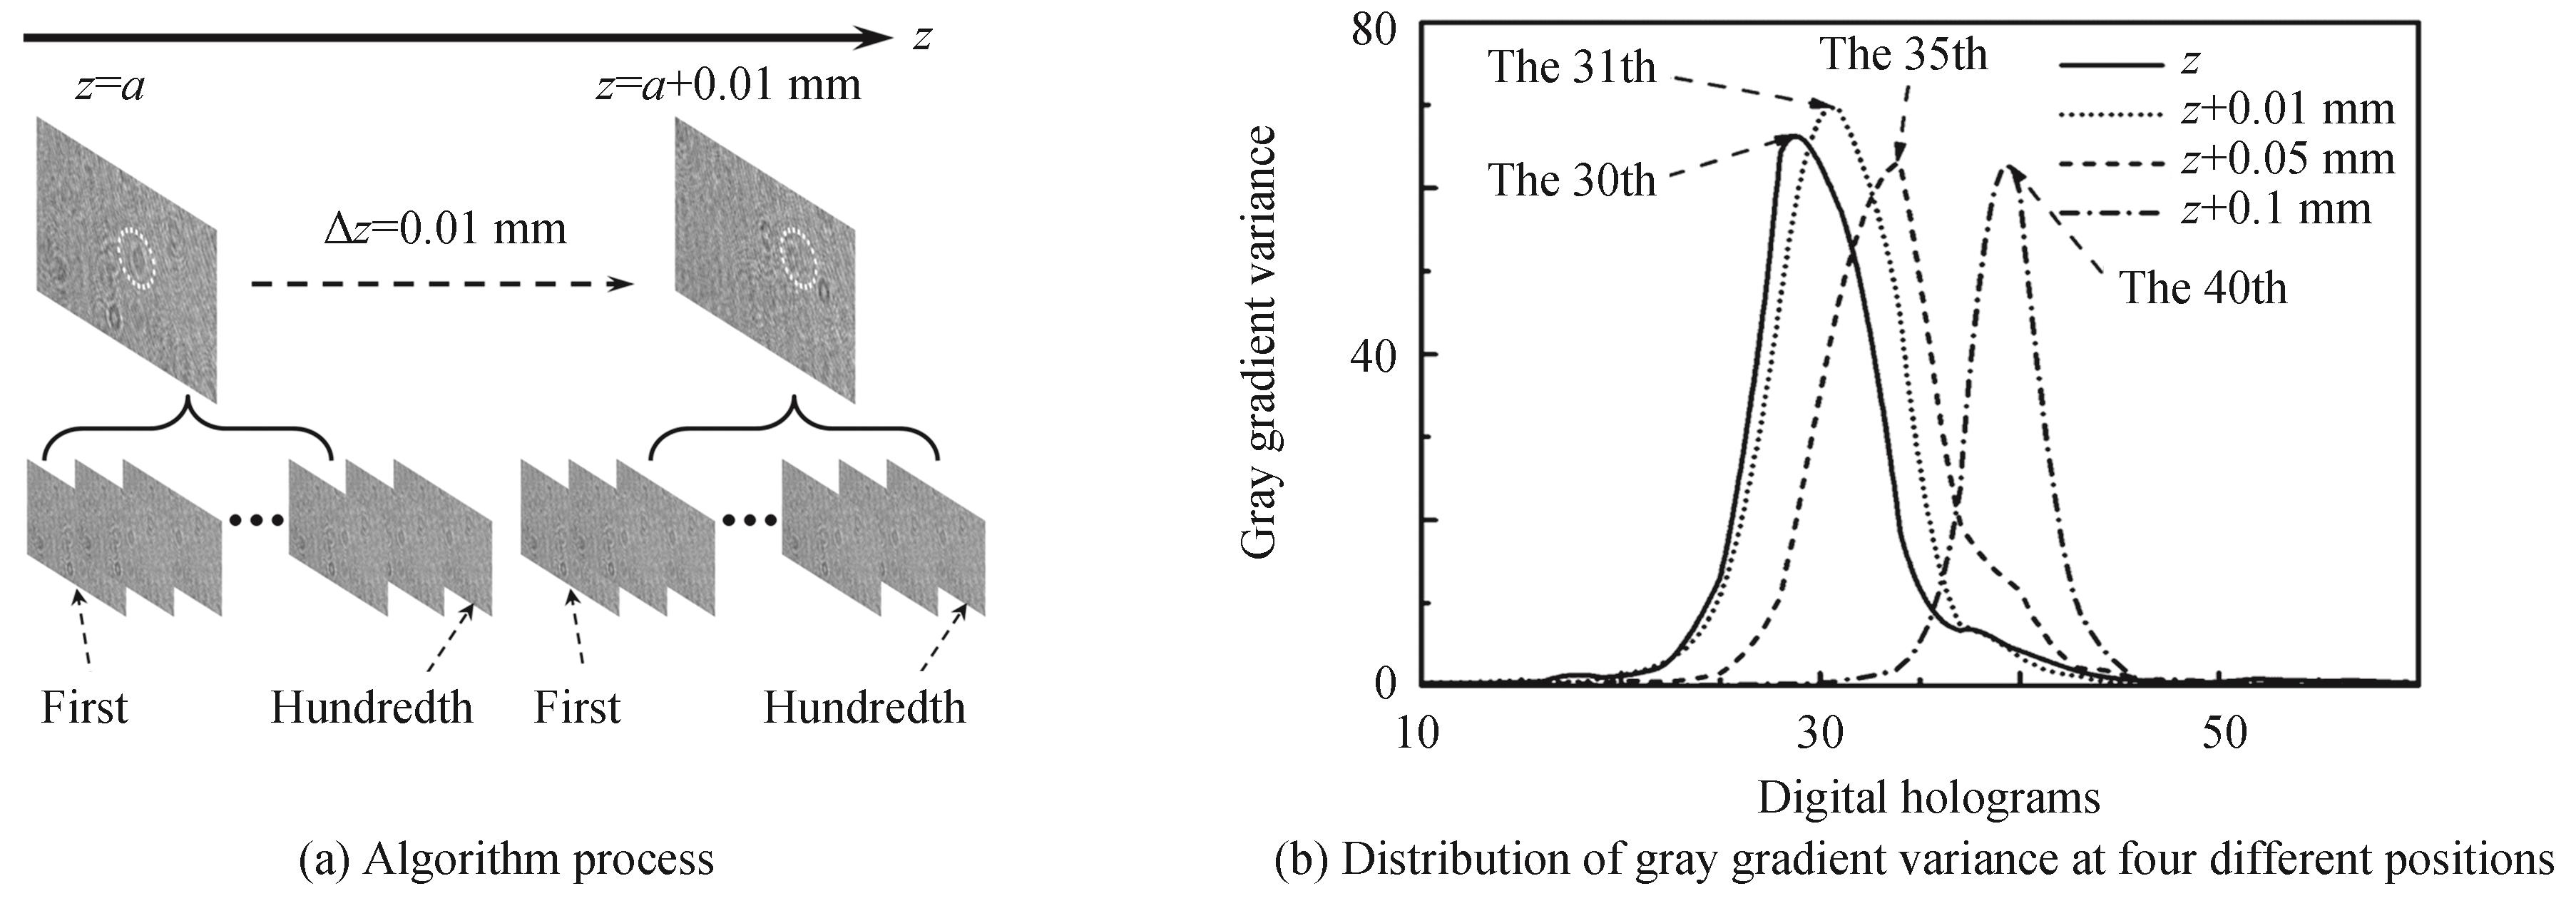 Gray gradient variance distribution of fusion hologram